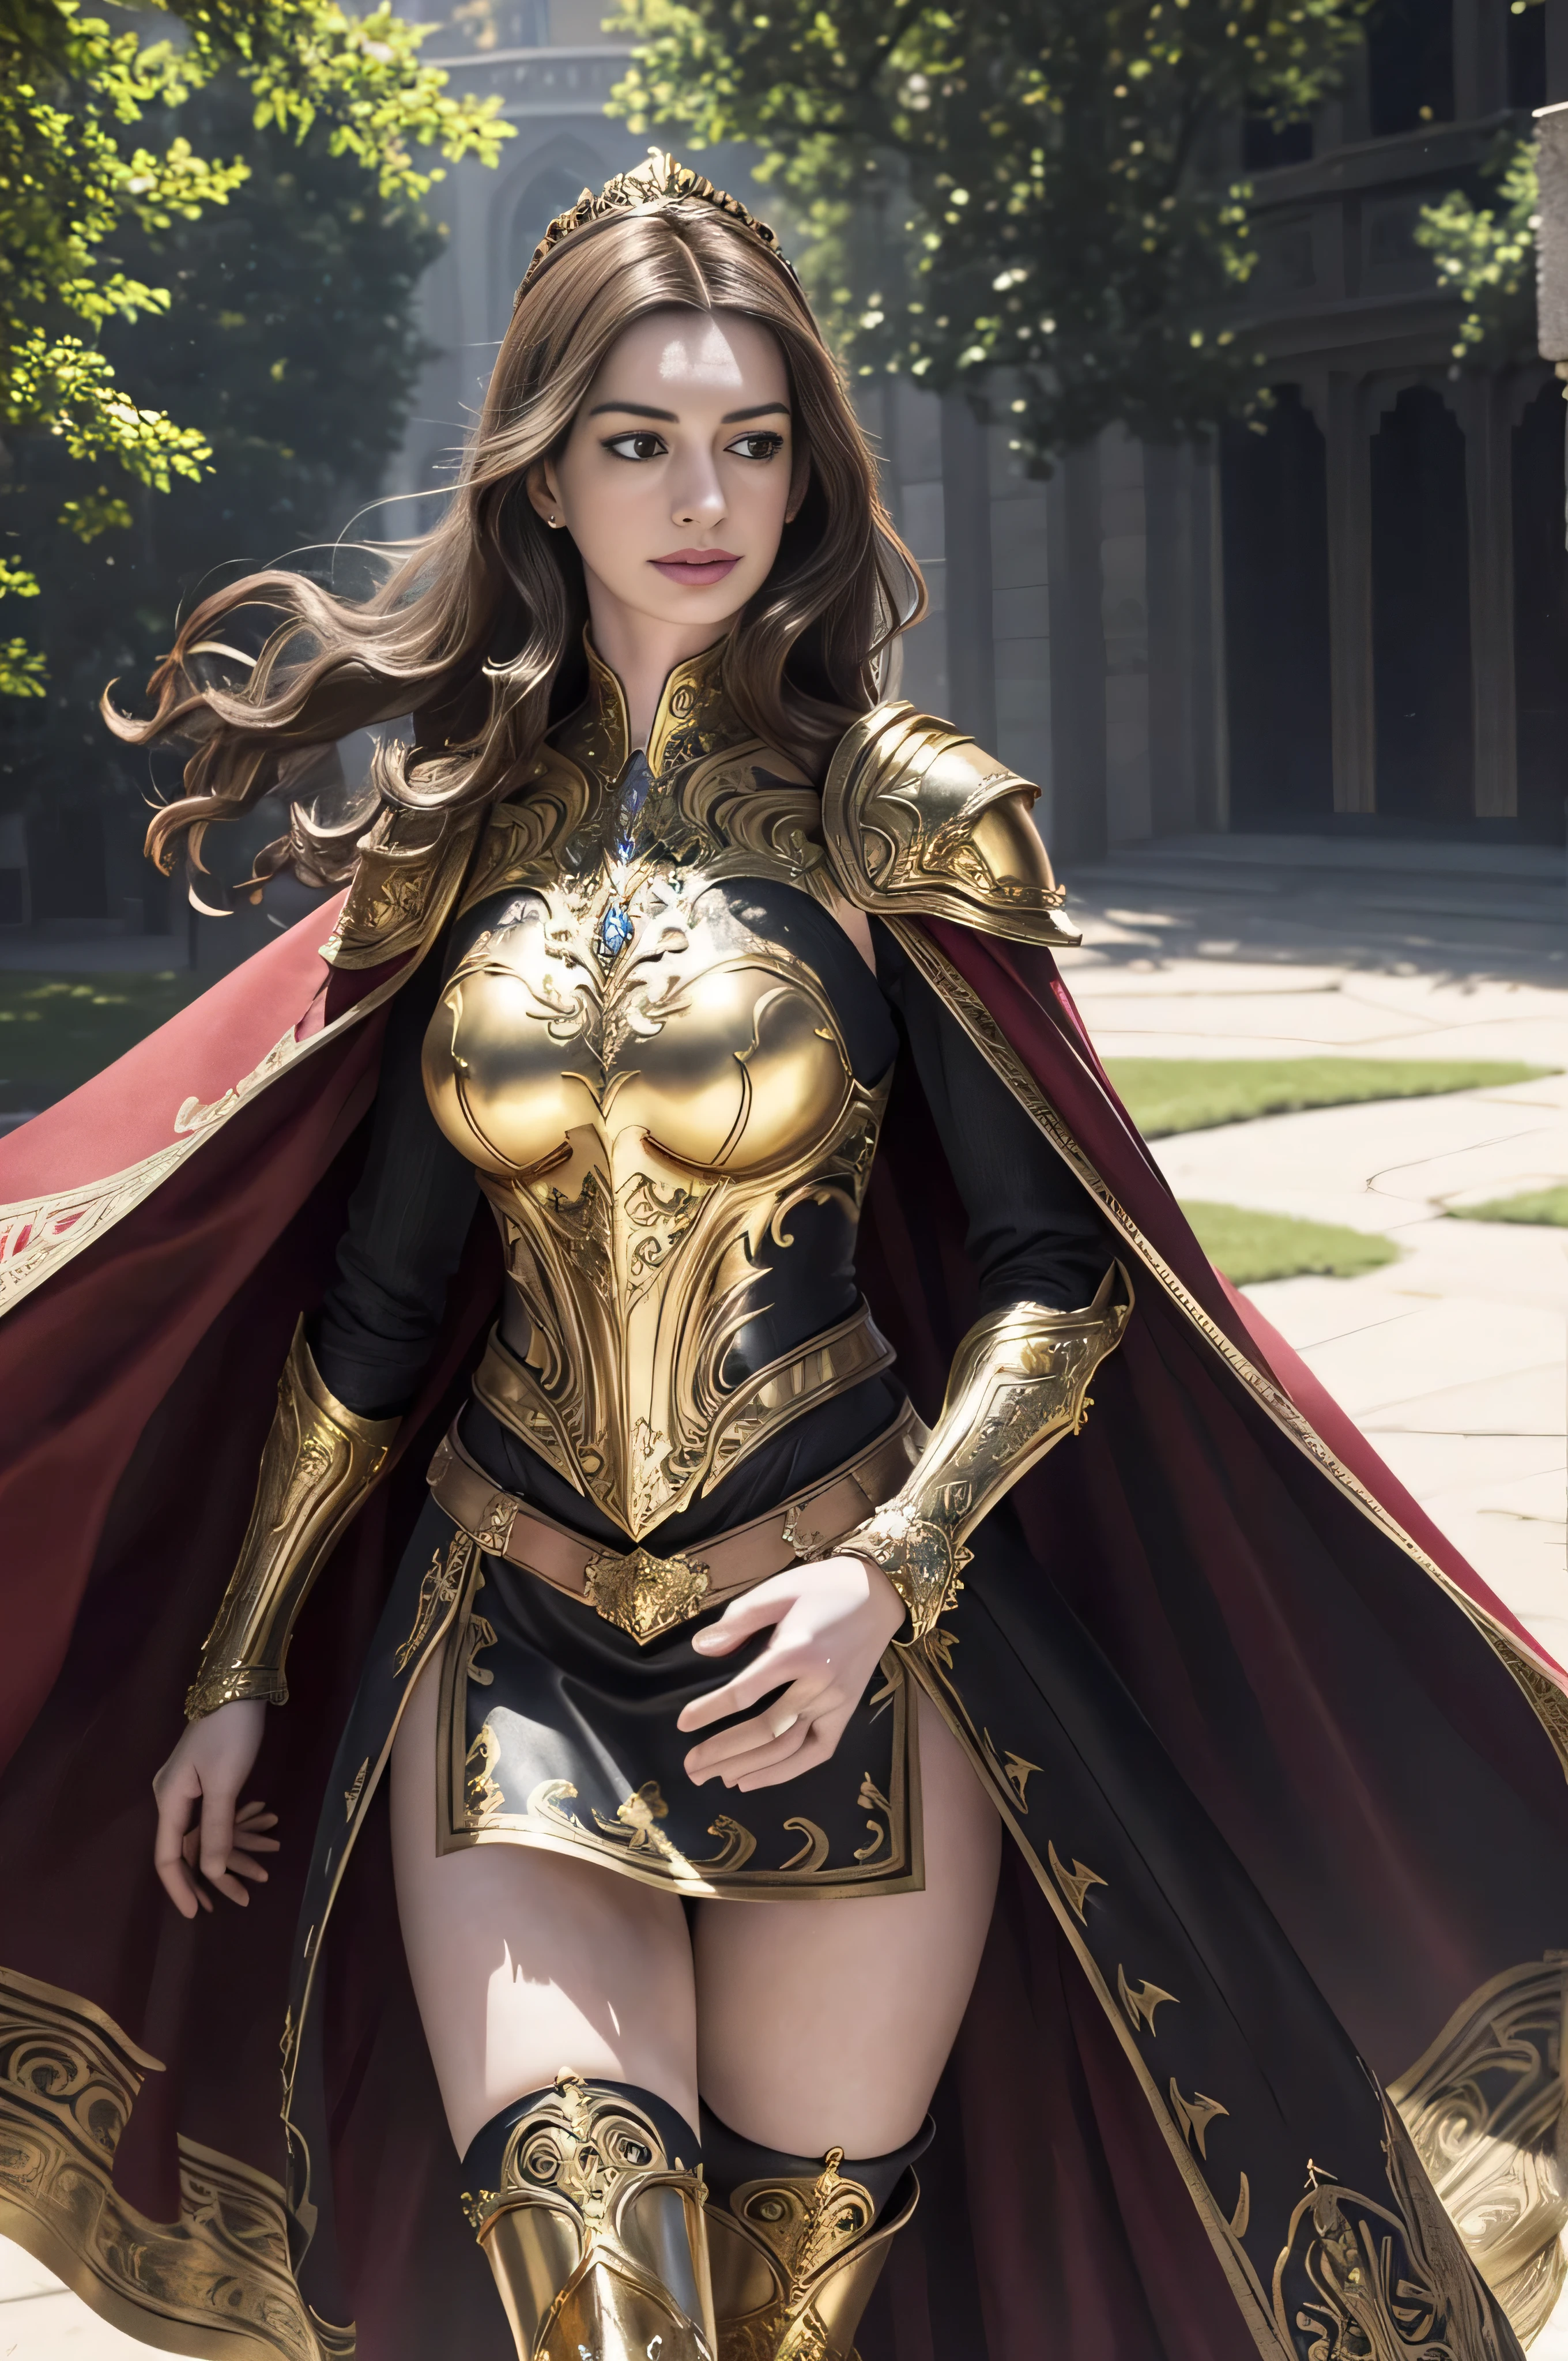 ((Anne Hathaway in ornate gold plate armor)), award winning concept art of tall (1girl) in ornate plate armor, elegant, ((looking front)), facing front, high long ponytail, dramatic long flowing hair, model on runway, epic, god rays, centered, (masterpiece:1.2), (best quality:1.2), Amazing, highly detailed, beautiful, finely detail, warm soft color grading, Depth of field, extremely detailed 8k, fine art, stunning, iridescent, shiny, light reflections, crisp, curls, wind, outdoor palace, regal pose, royal pose, hyper realism, vibrant, sunlit, edge detection, (miniskirt), pelvic cover, thigh high boots, knees, long flowing cape